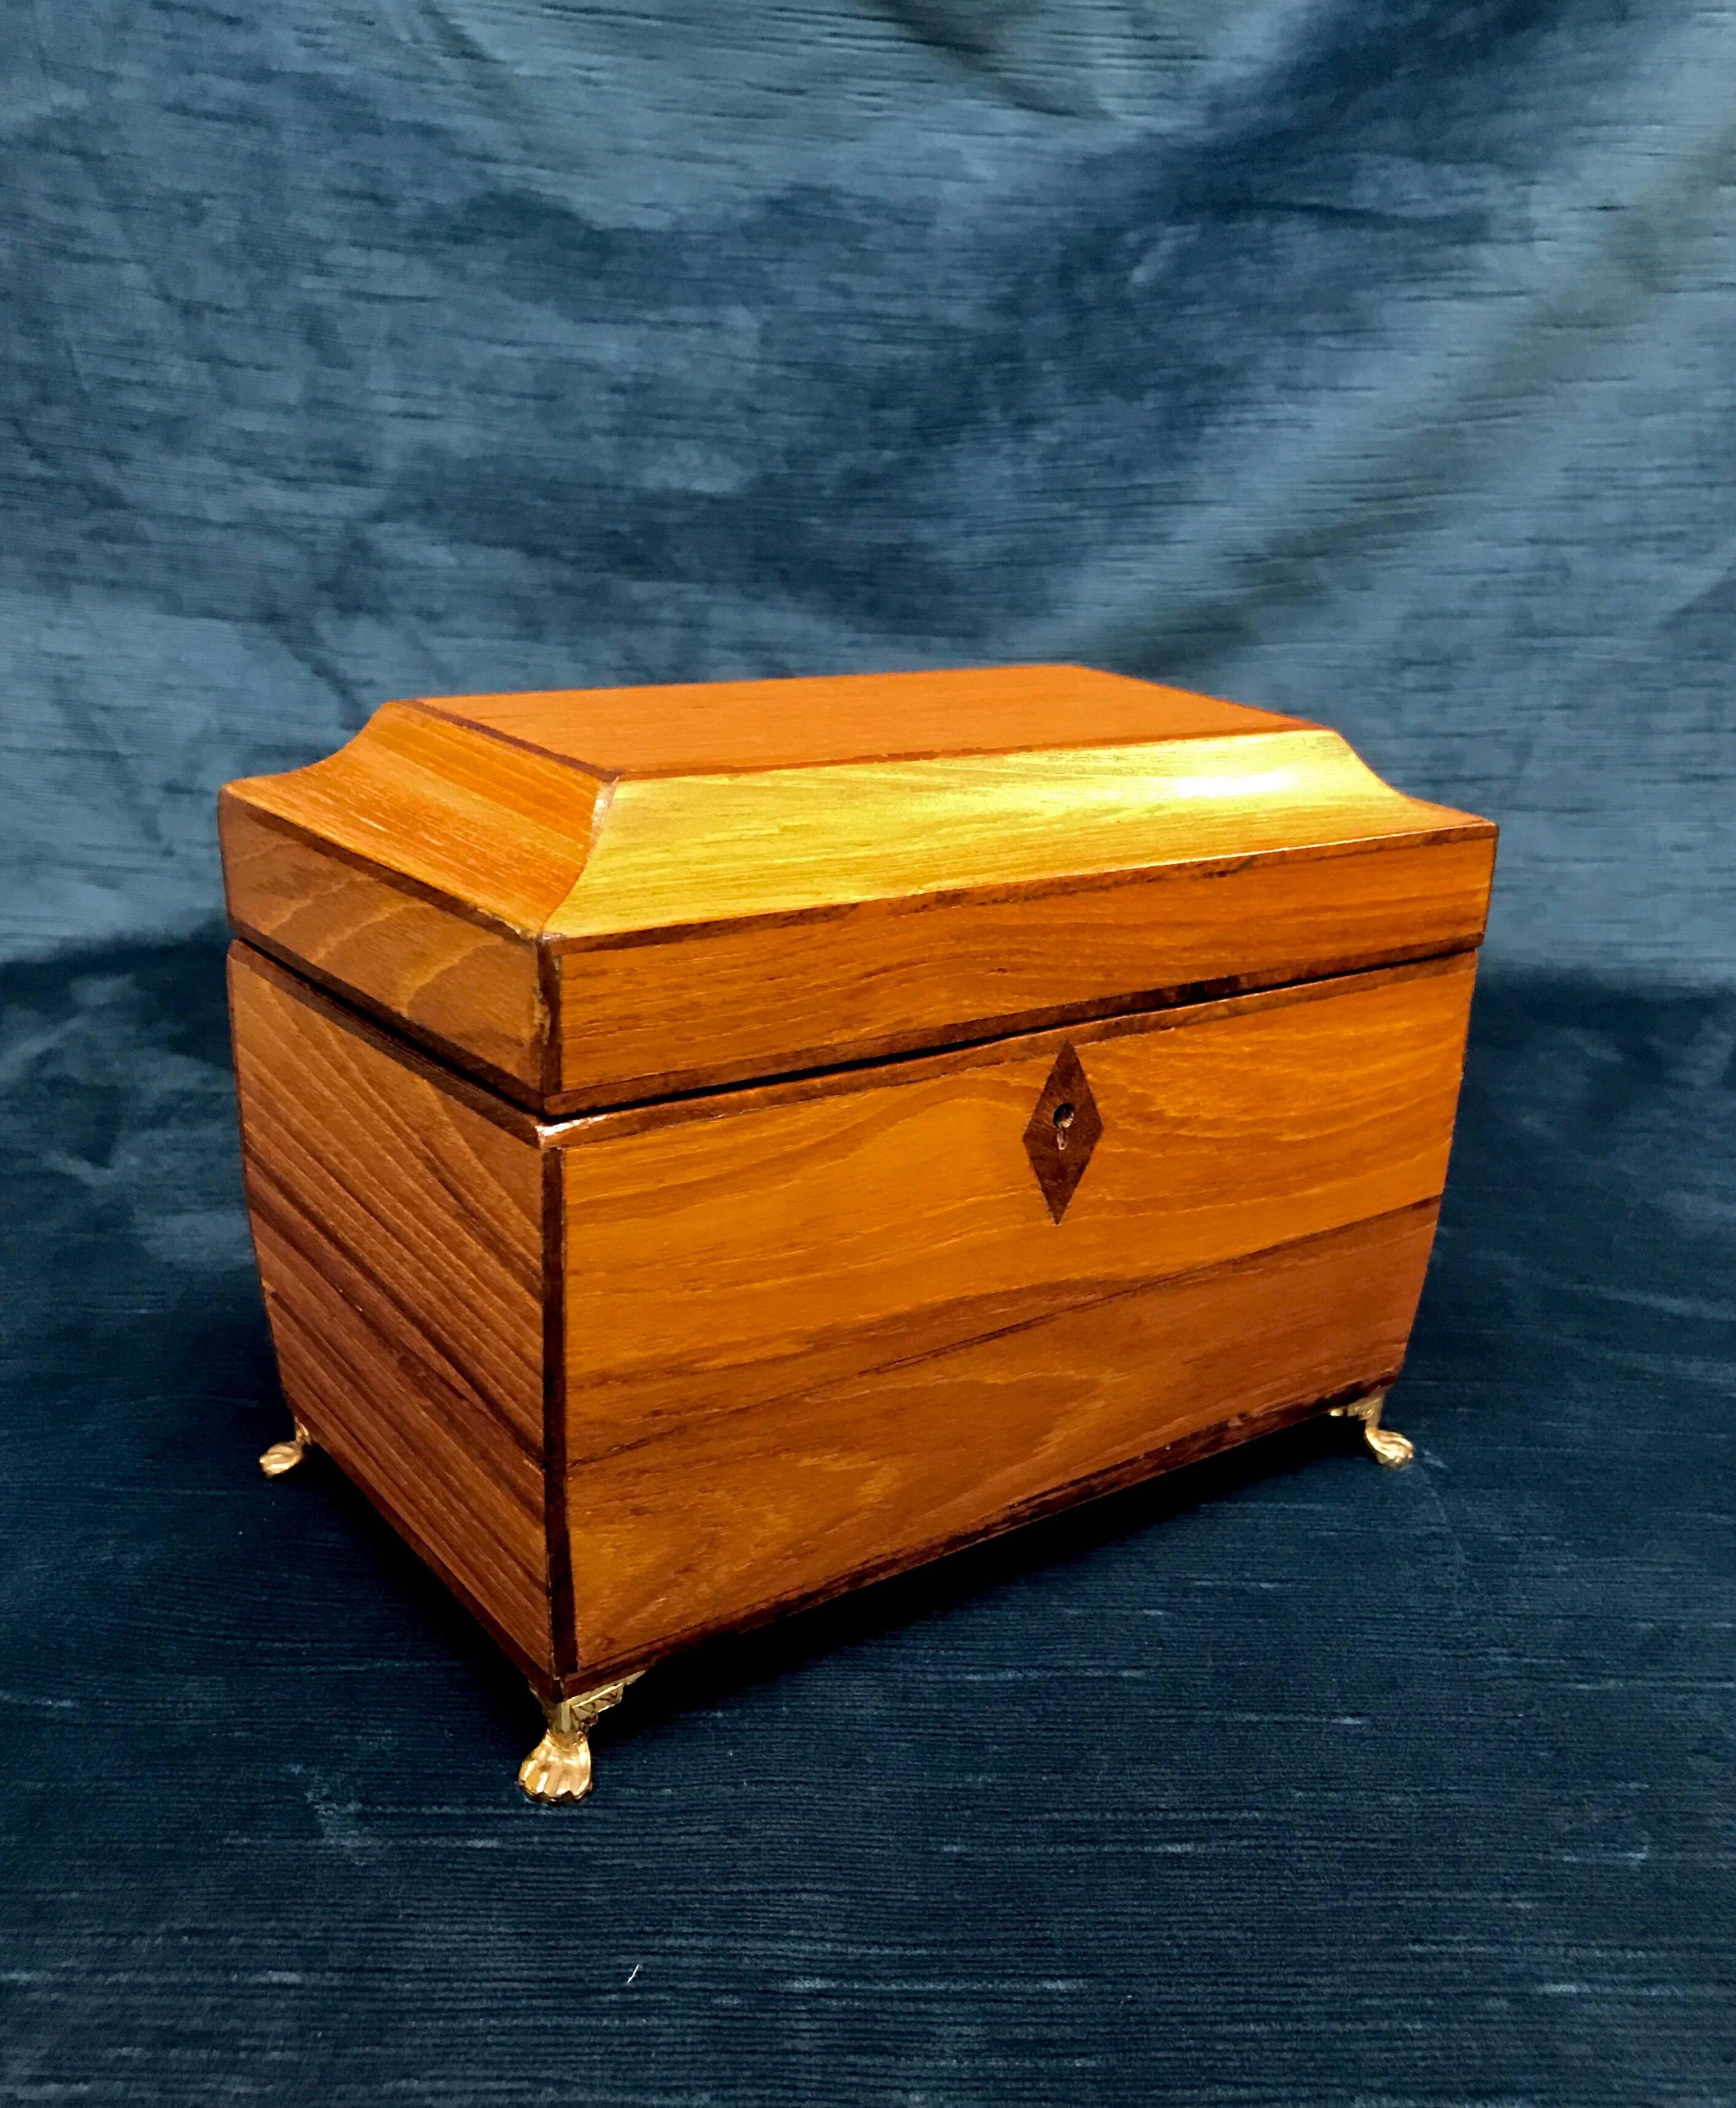 Late 19th century Regency tea caddy of a small size. The sarcophagus formed container is composed of oak and trimmed out in mahogany and ebony woods. The hinged box opens to reveal flanking and lidded storage cells which can readily store tea,